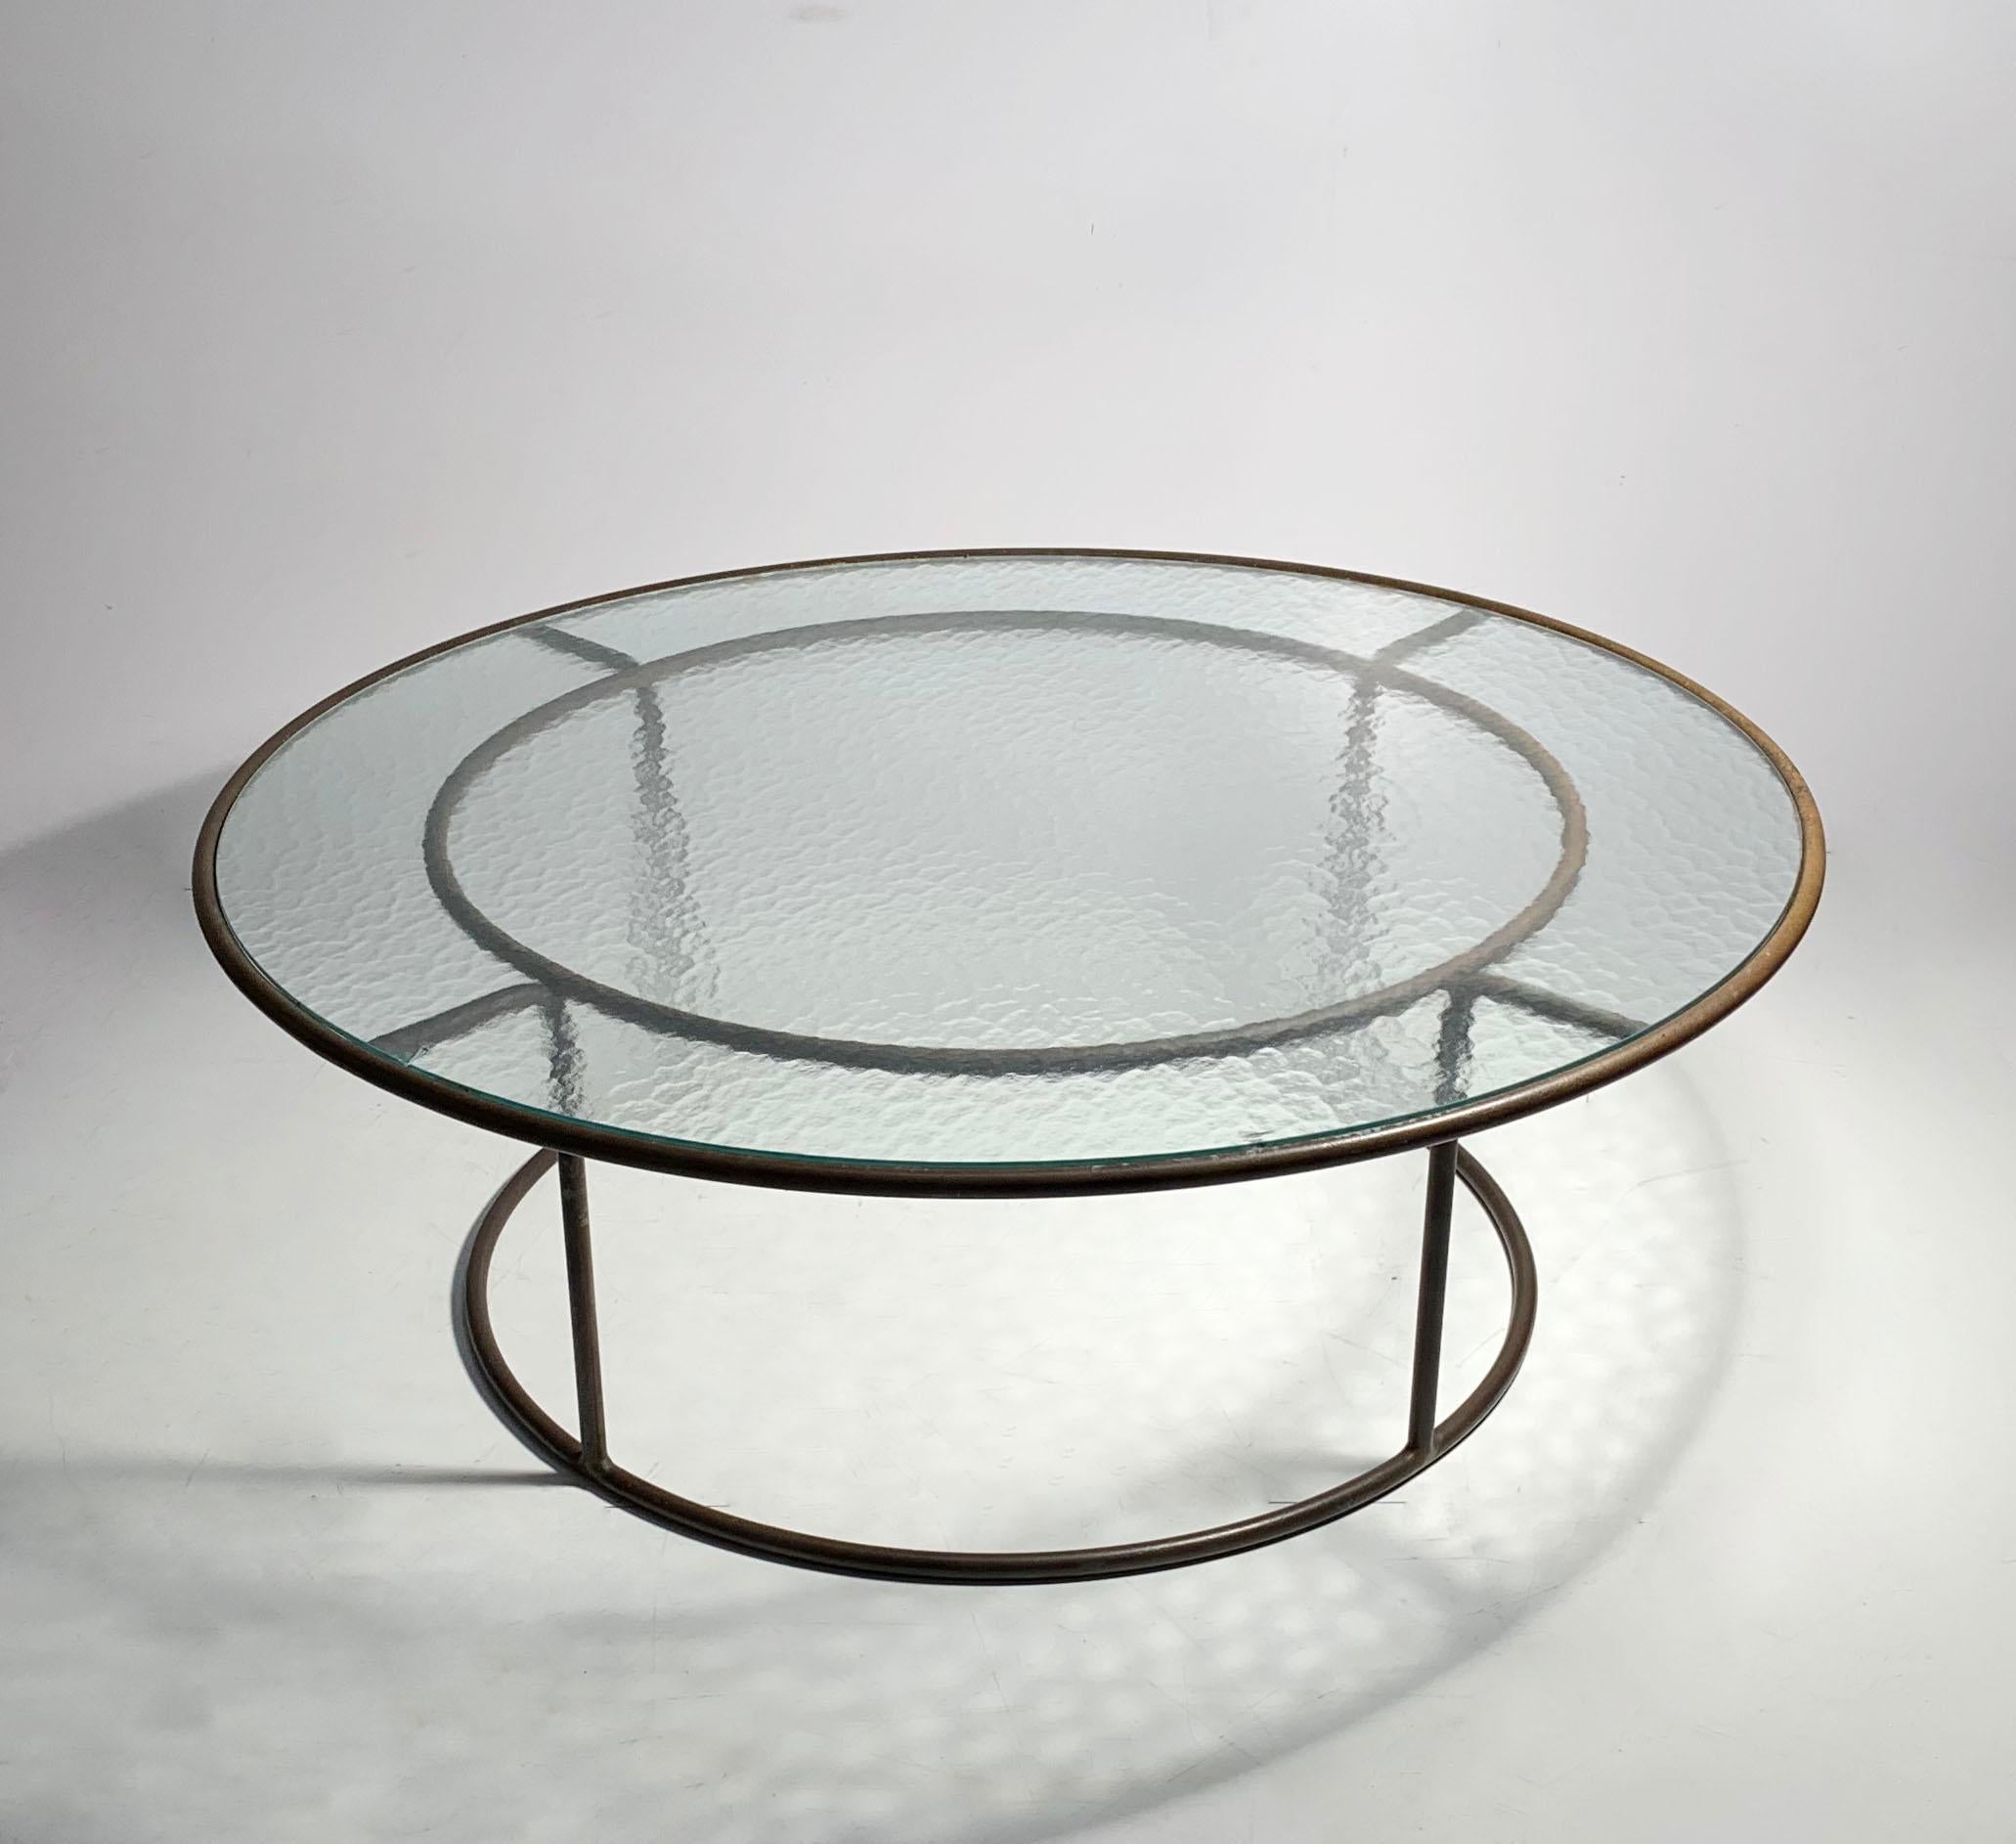 Walter lamb large round coffee table.

Original textured Glass. 2 chips as noted in photos.